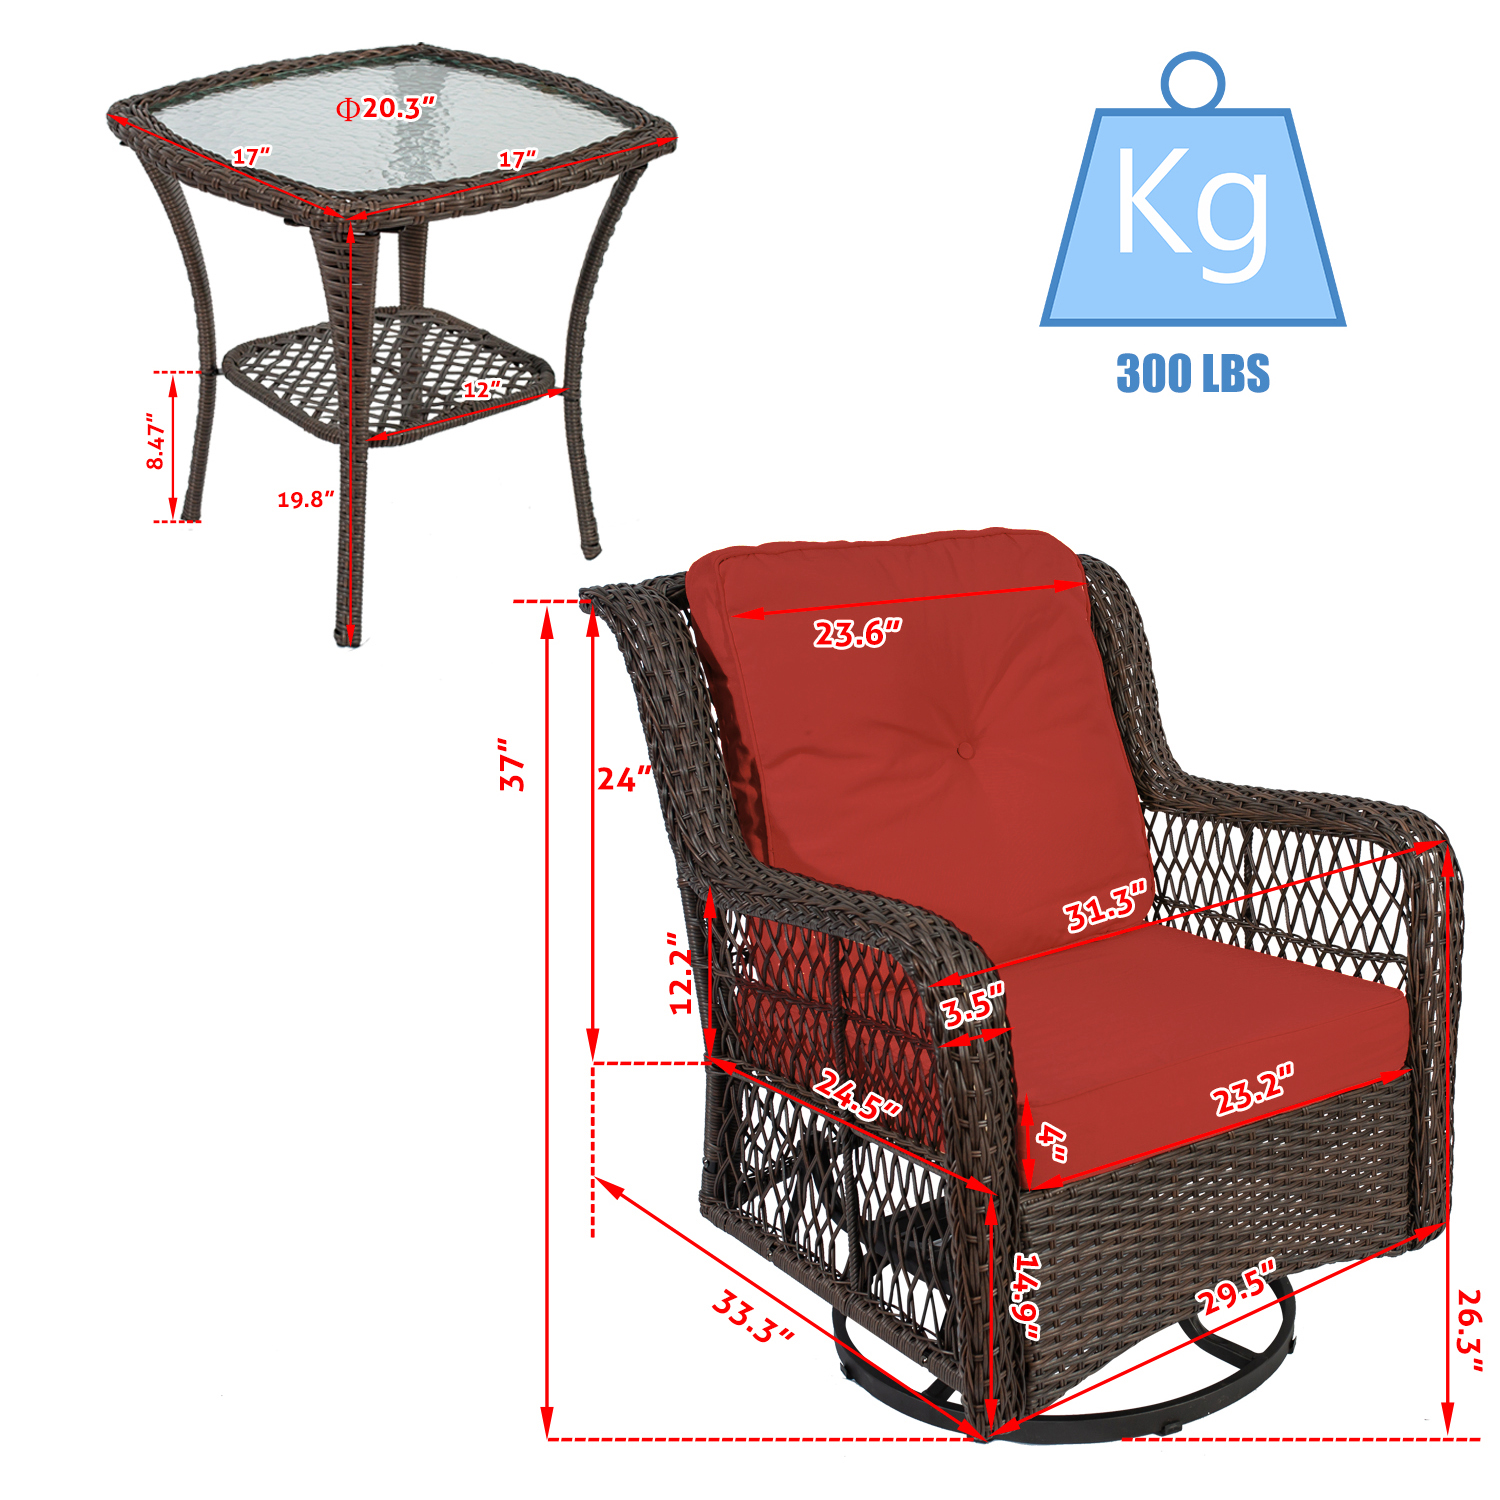 3-Piece Rattan Wicker Stainless Chat Set with Swivel Rocking Chairs Coffee Table for Indoor Outdoor Space Deck Porch Patio Conversation Bistro Set Rust - image 5 of 19